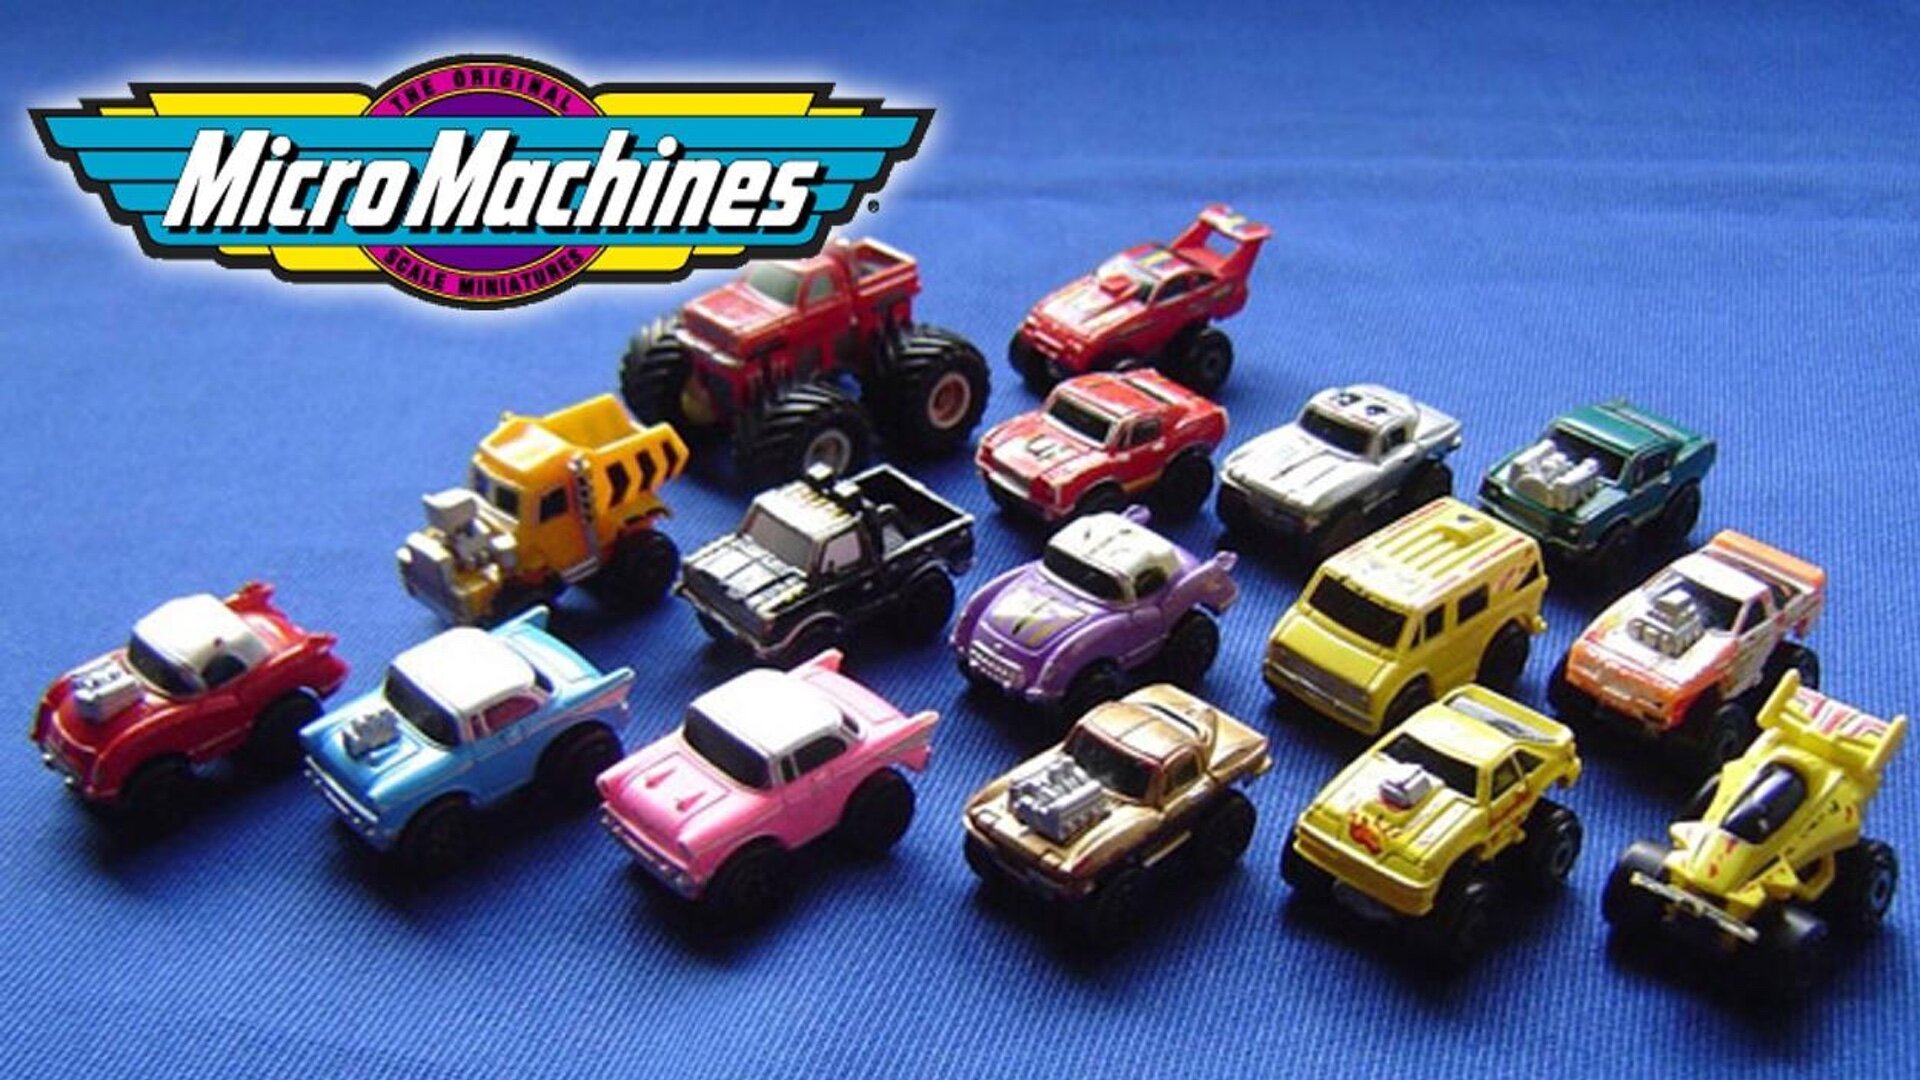 Micro Machines Wallpapers